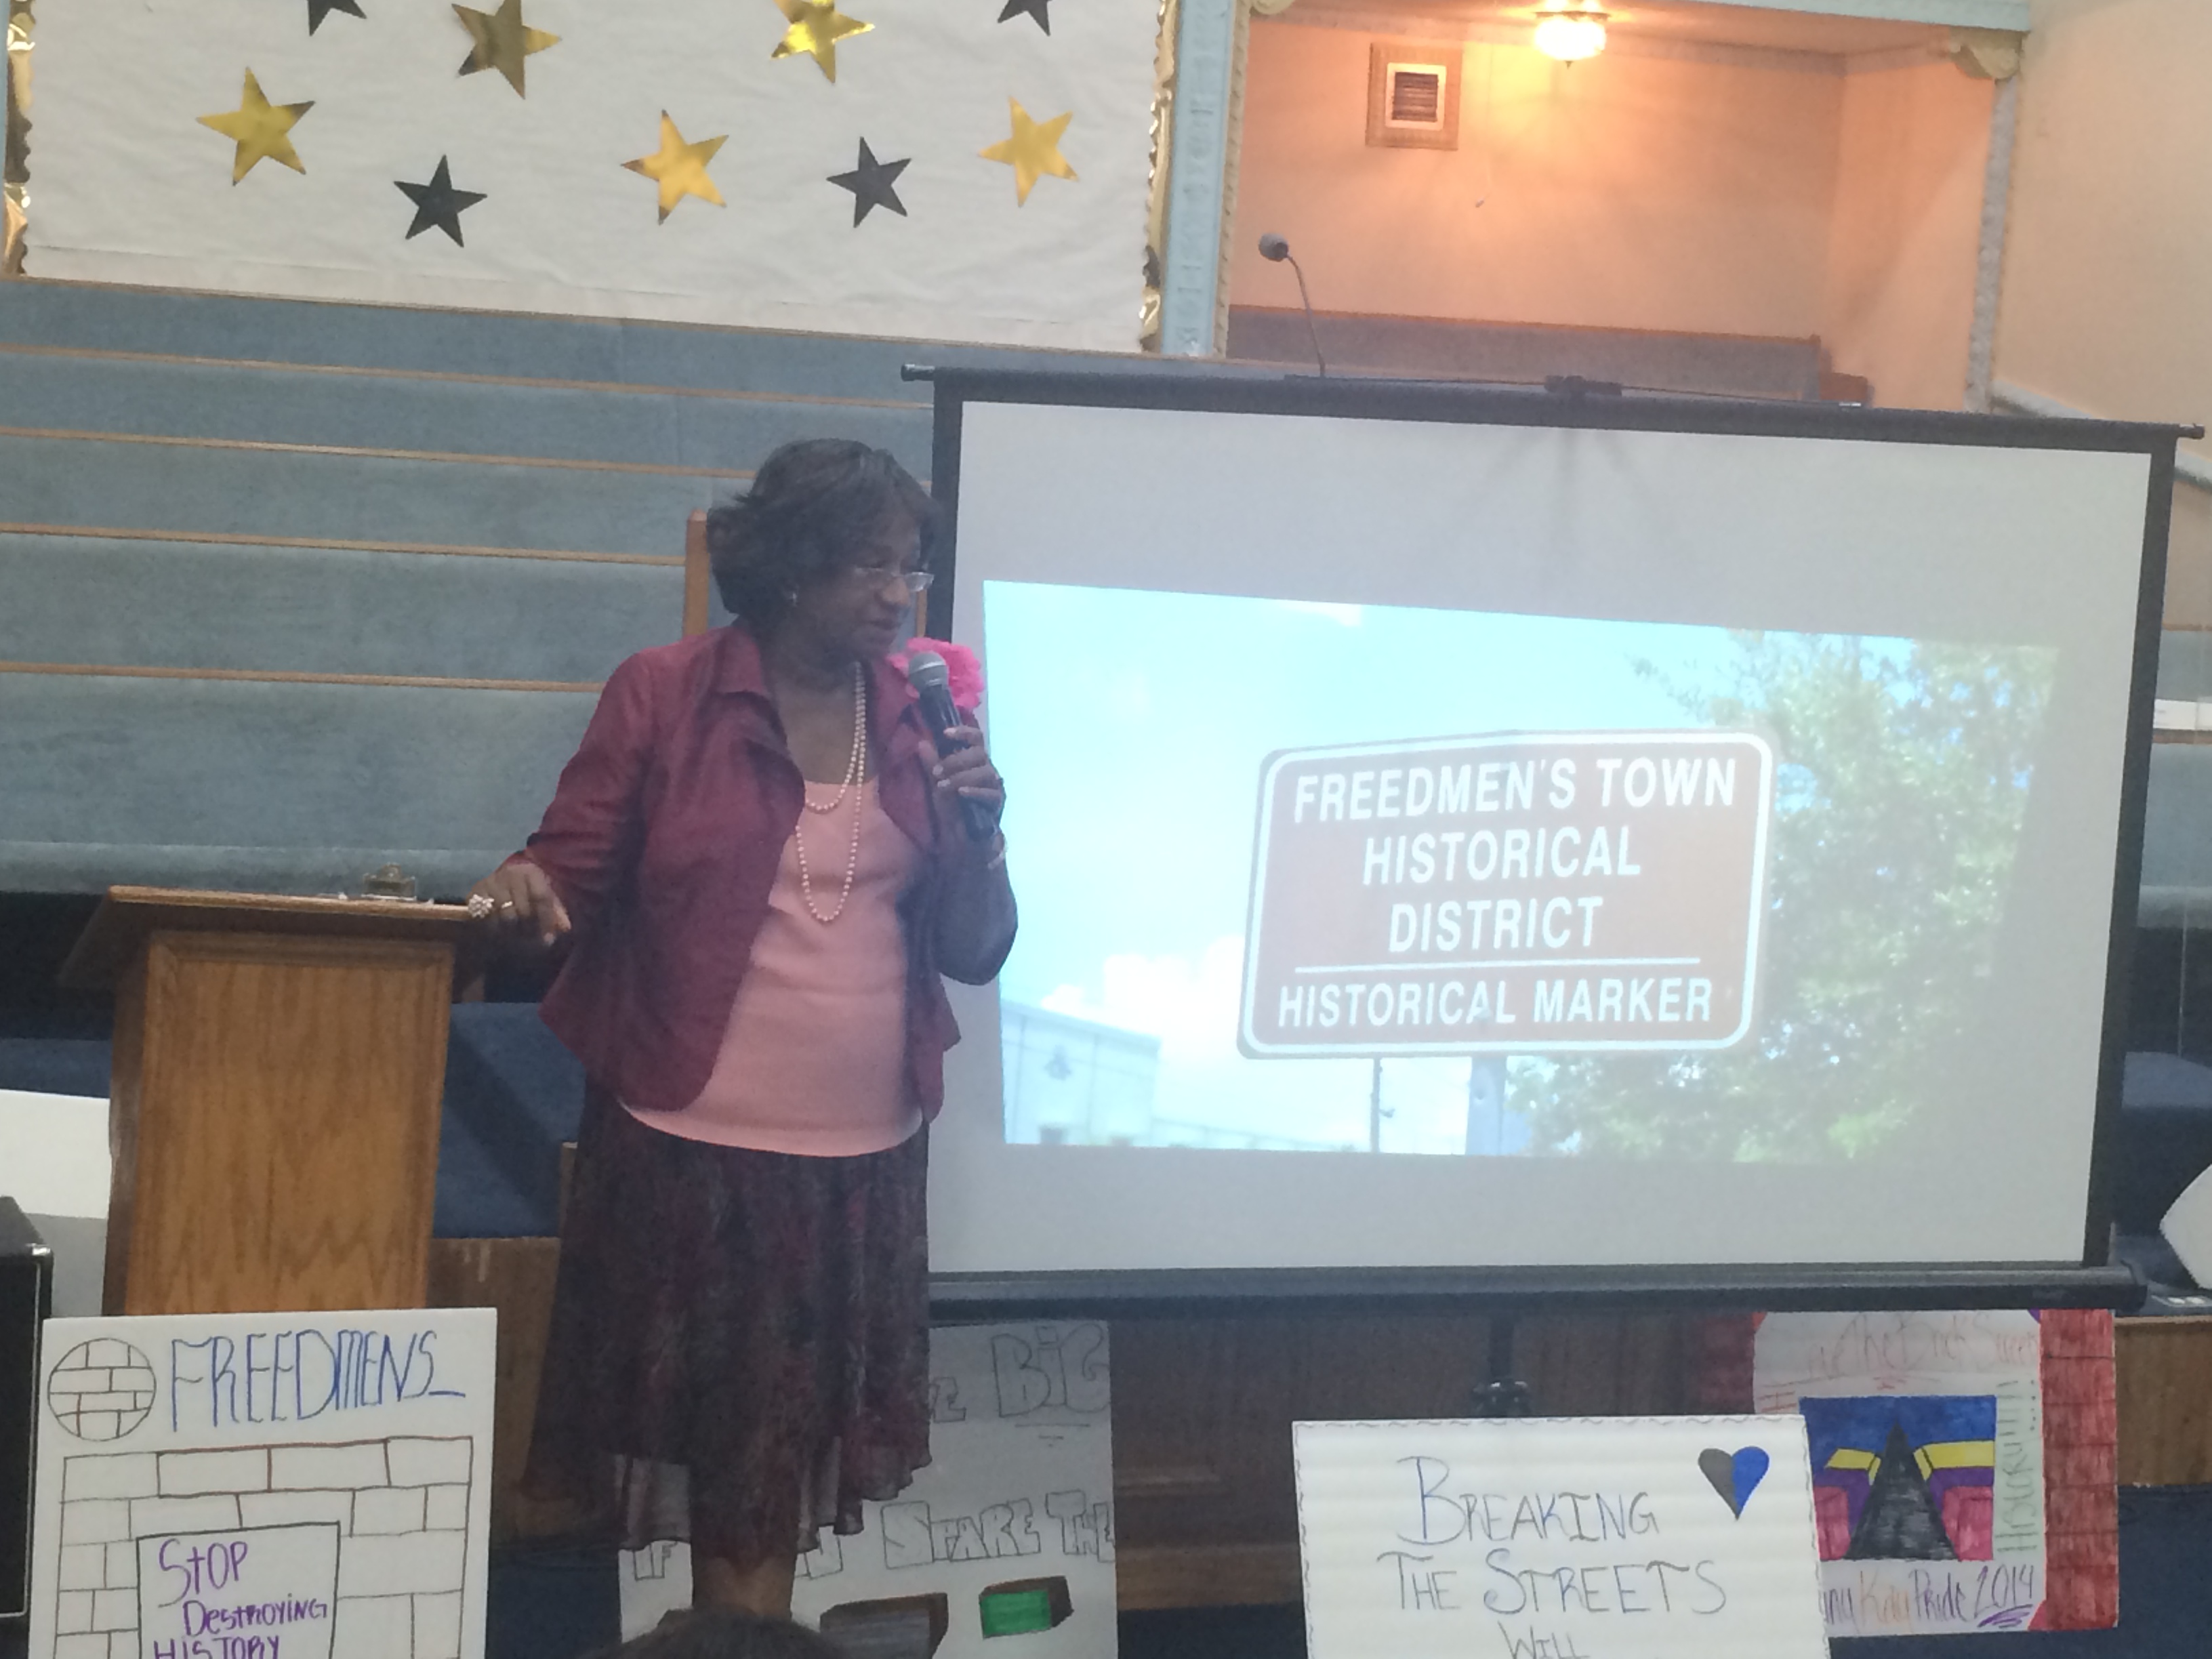 Dorris Ellis Robinson educating the community on the status of the streets during a town hall at Mt. Horeb Baptist Church in Freedmen's Town.